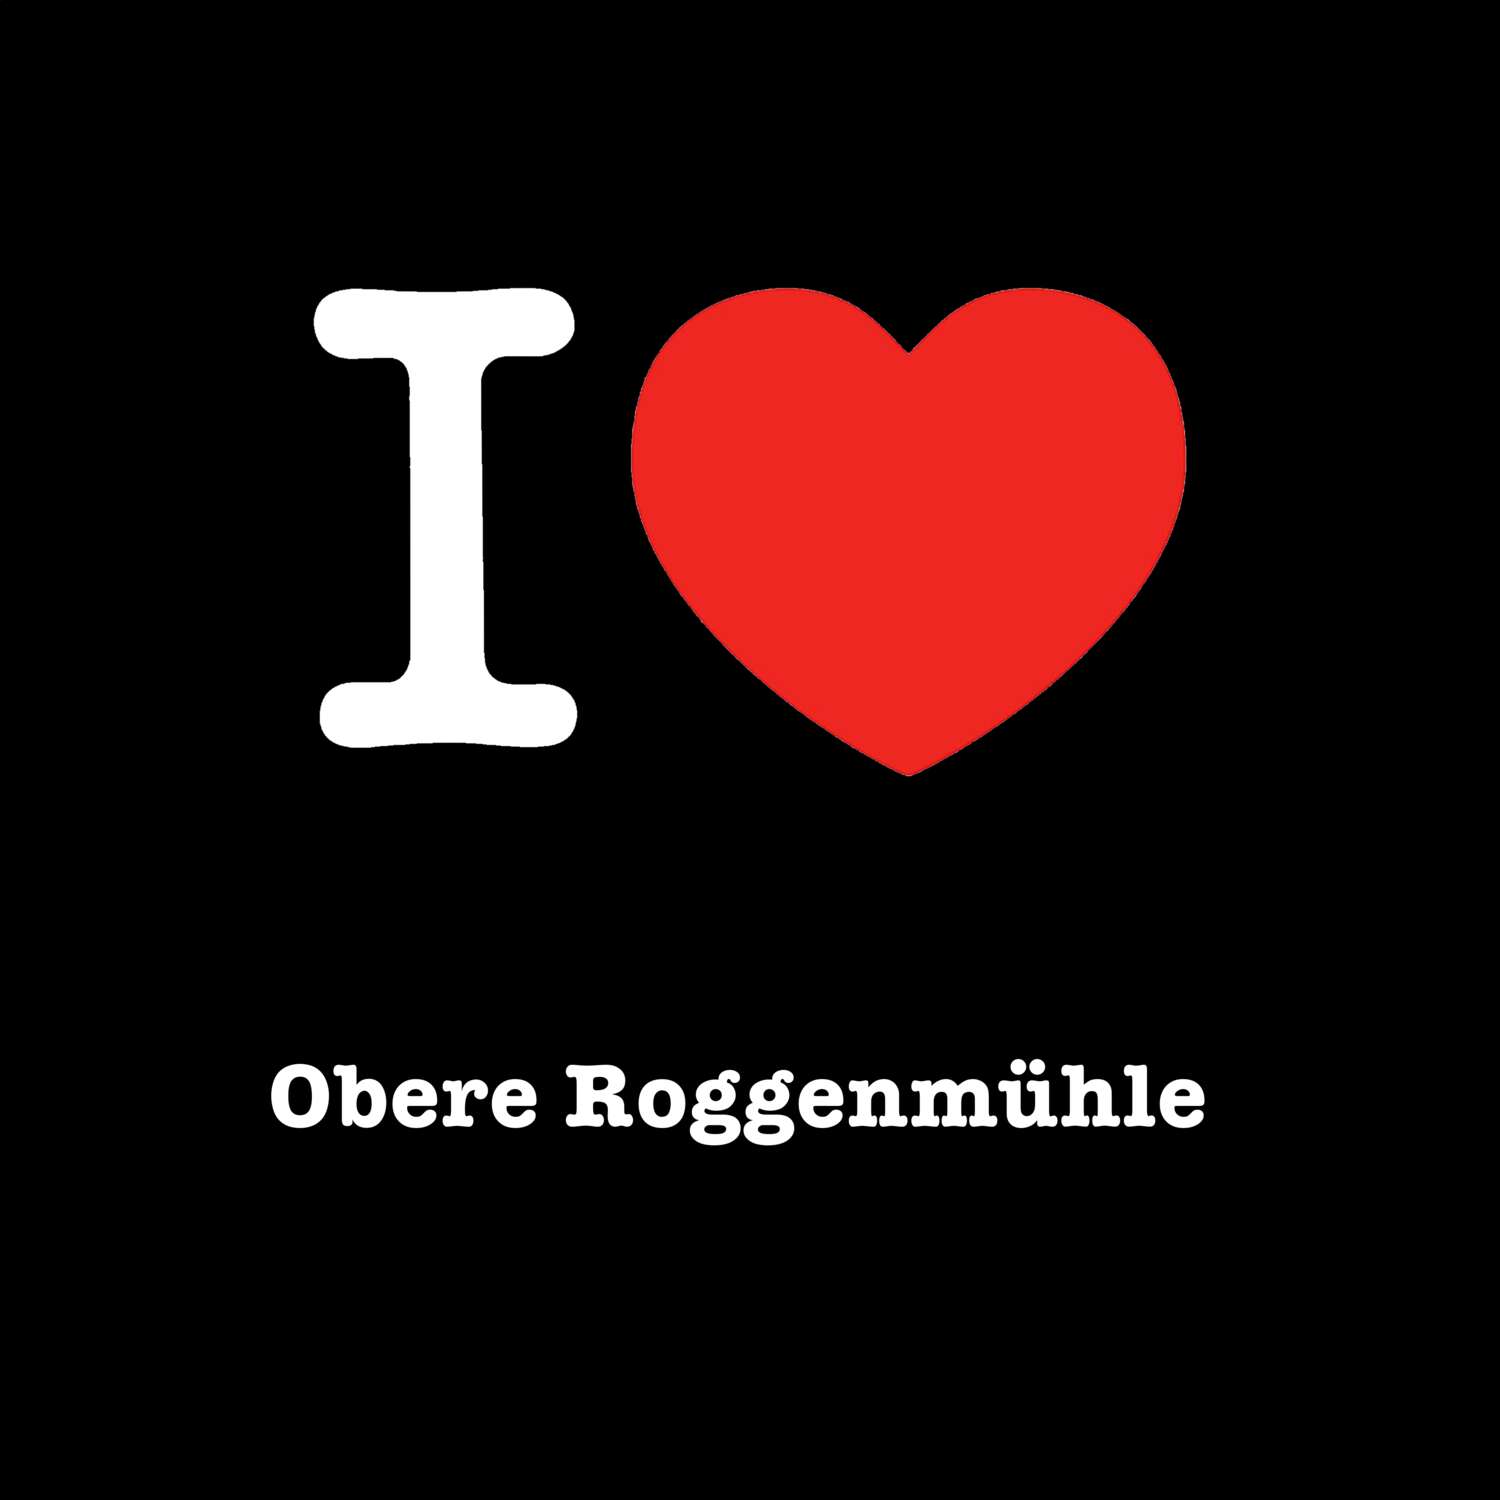 Obere Roggenmühle T-Shirt »I love«